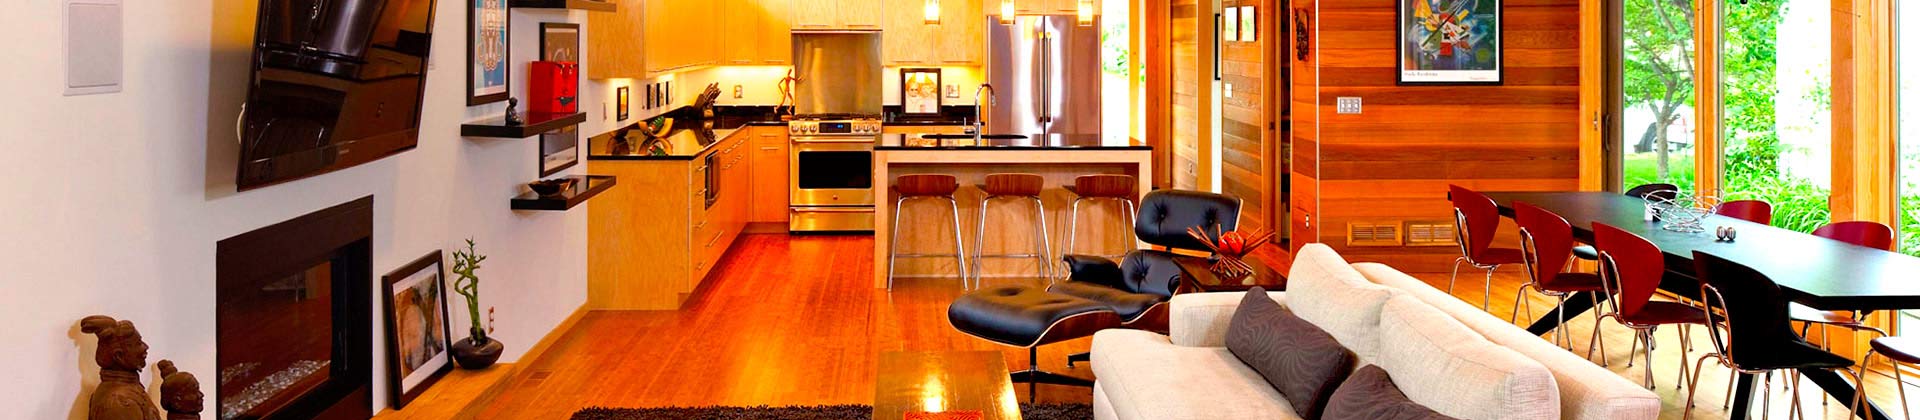 interior remodeling kitchen | Construction Services in San Francisco and Marin County